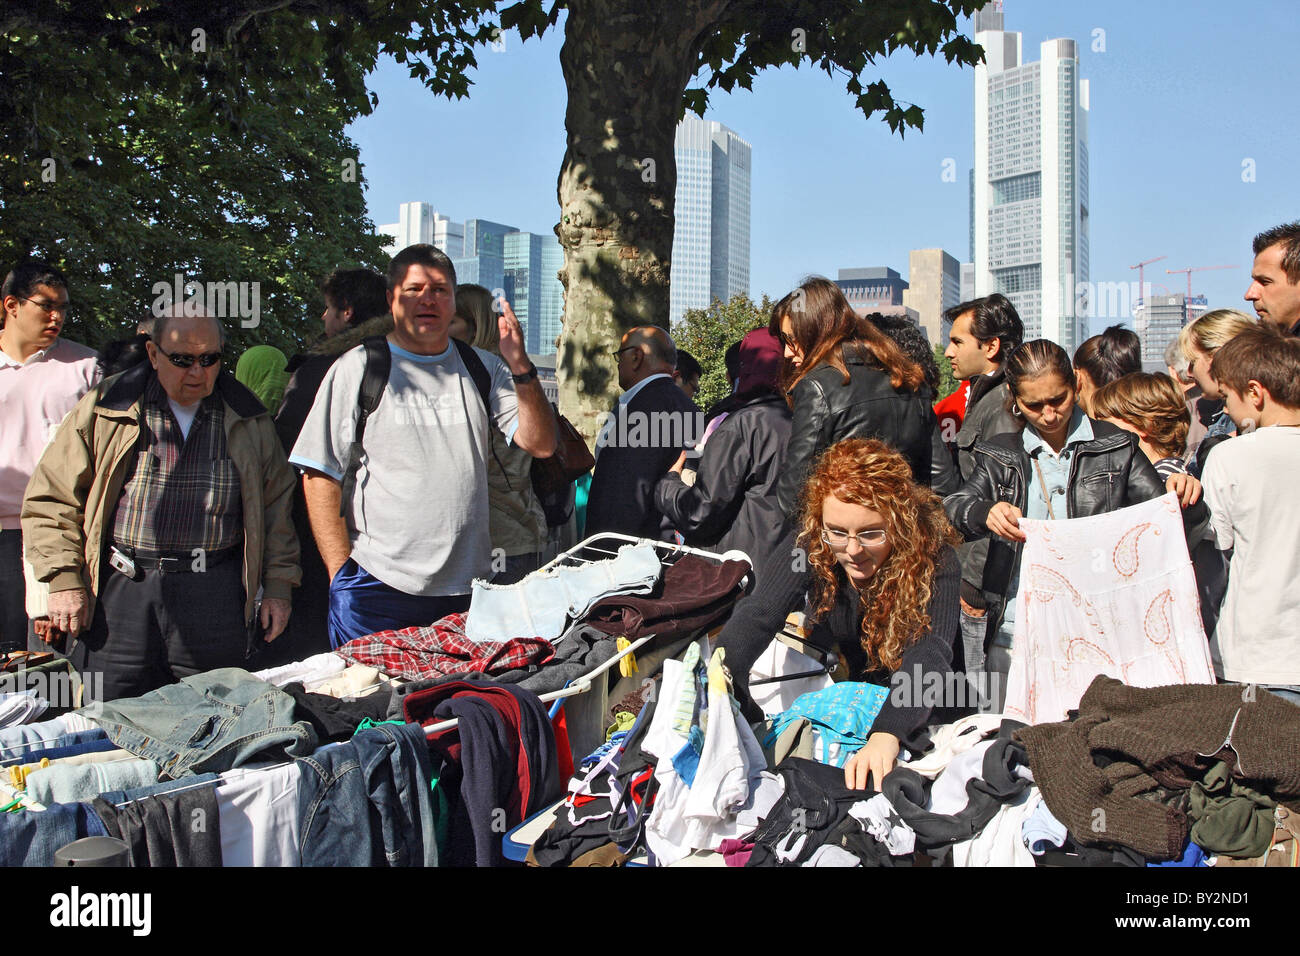 A flea market and high-rise buildings in the financial district, Frankfurt am Main, Germany Stock Photo